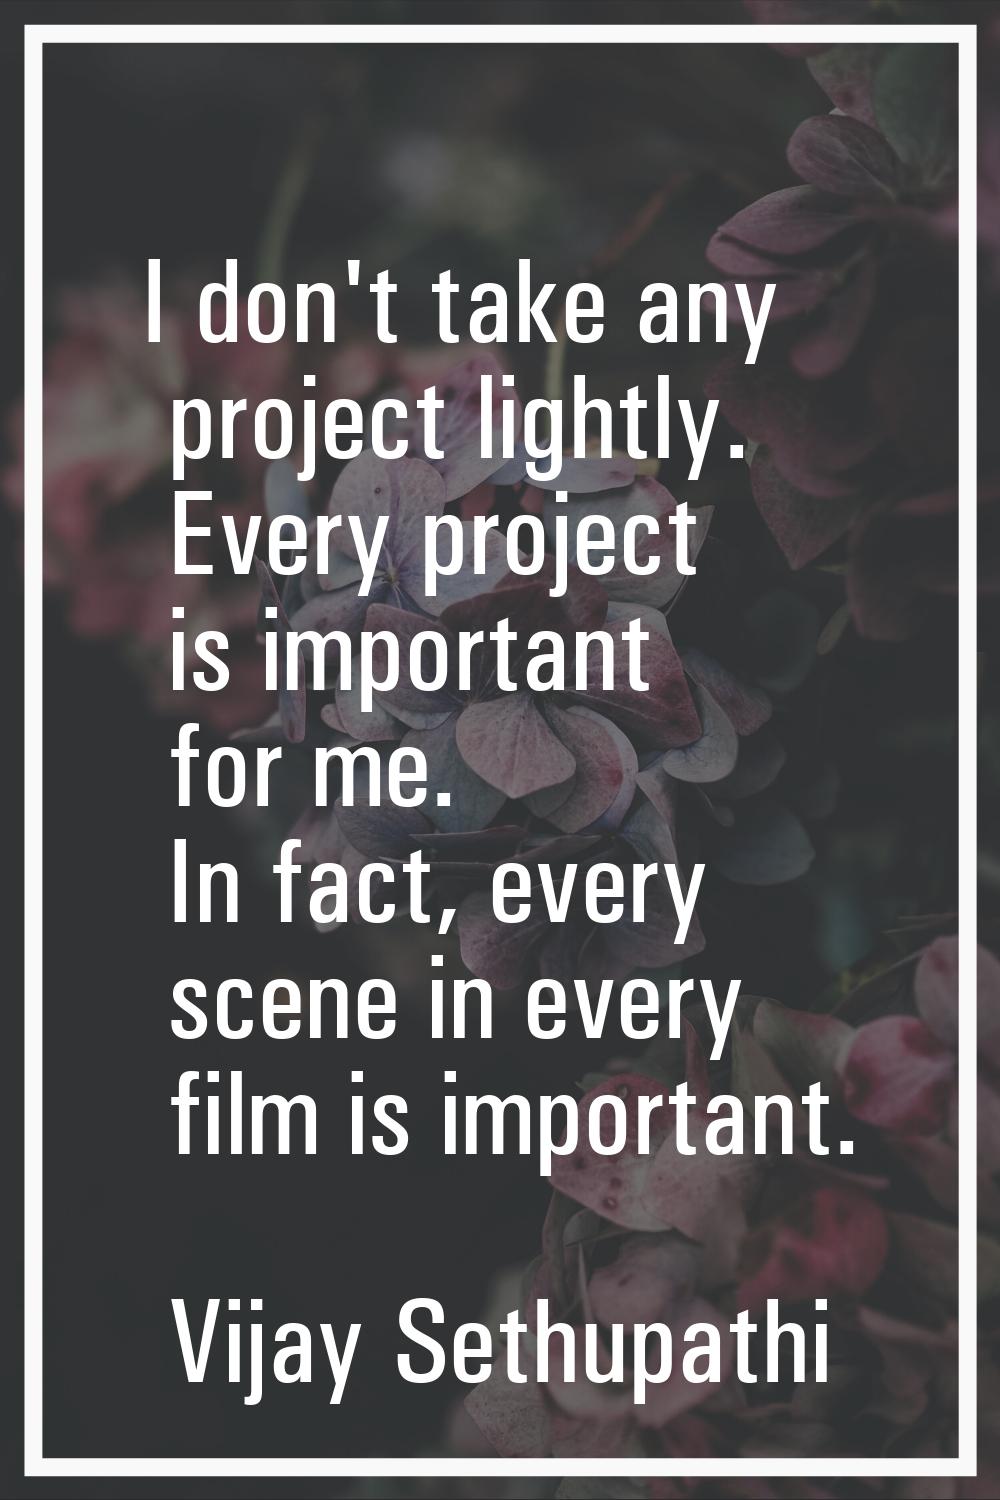 I don't take any project lightly. Every project is important for me. In fact, every scene in every 